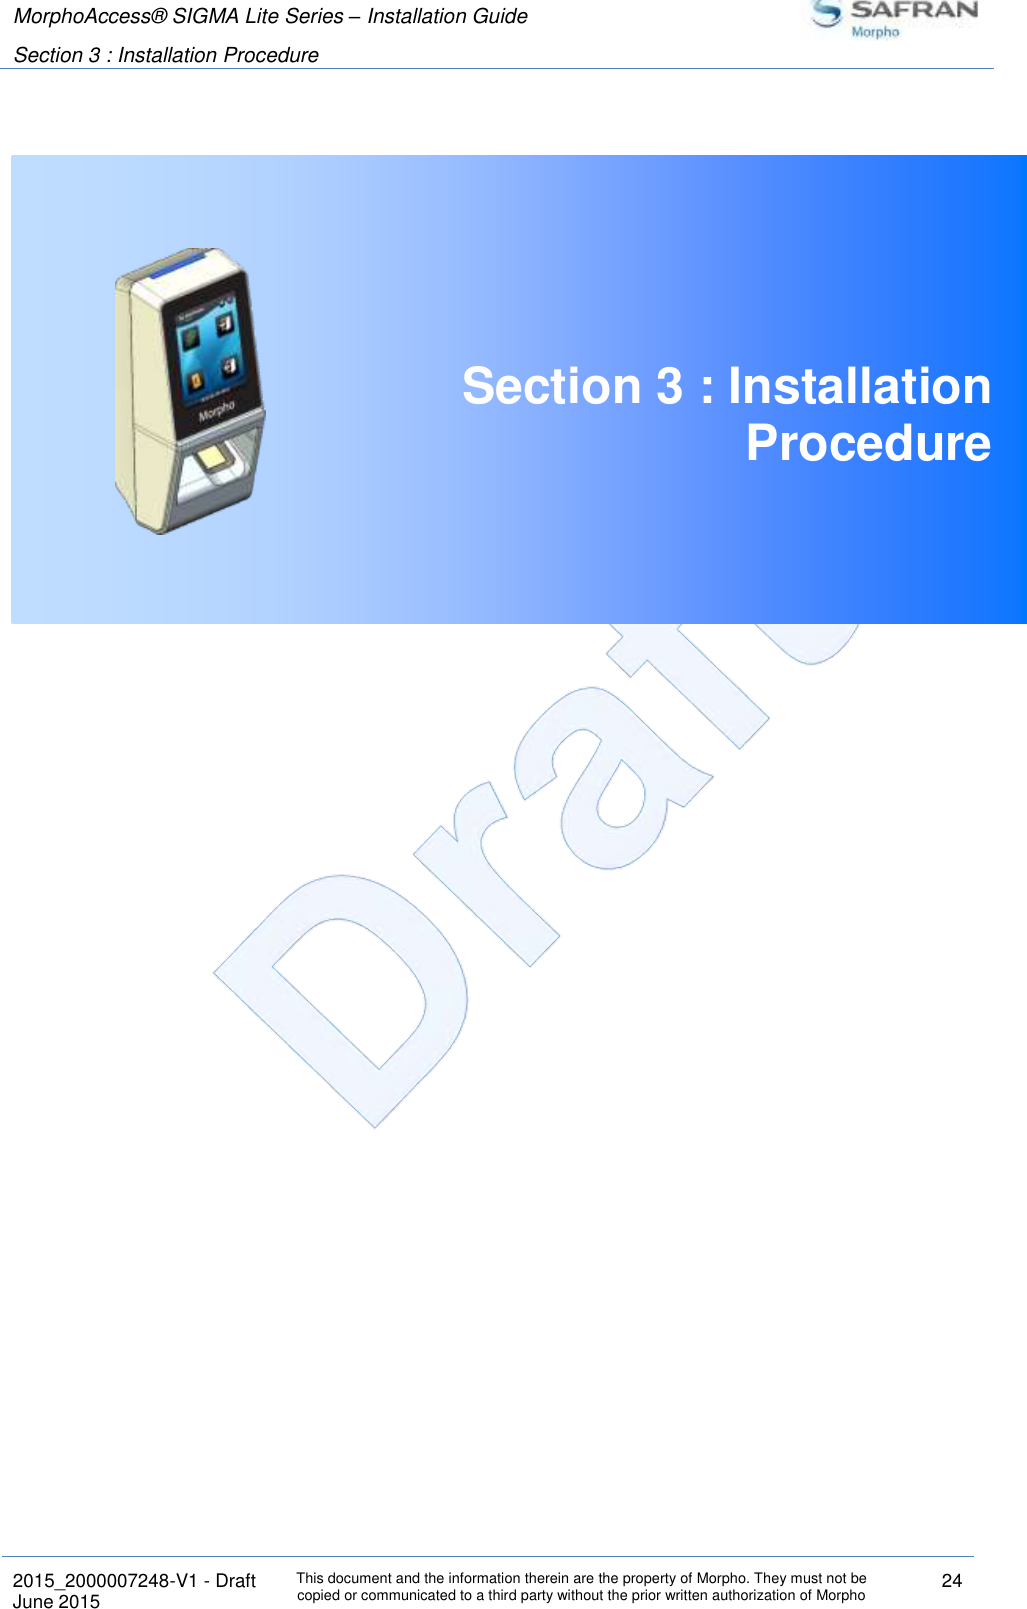 MorphoAccess® SIGMA Lite Series – Installation Guide  Section 3 : Installation Procedure   2015_2000007248-V1 - Draft This document and the information therein are the property of Morpho. They must not be copied or communicated to a third party without the prior written authorization of Morpho 24 June 2015    Section 3 : Installation Procedure     